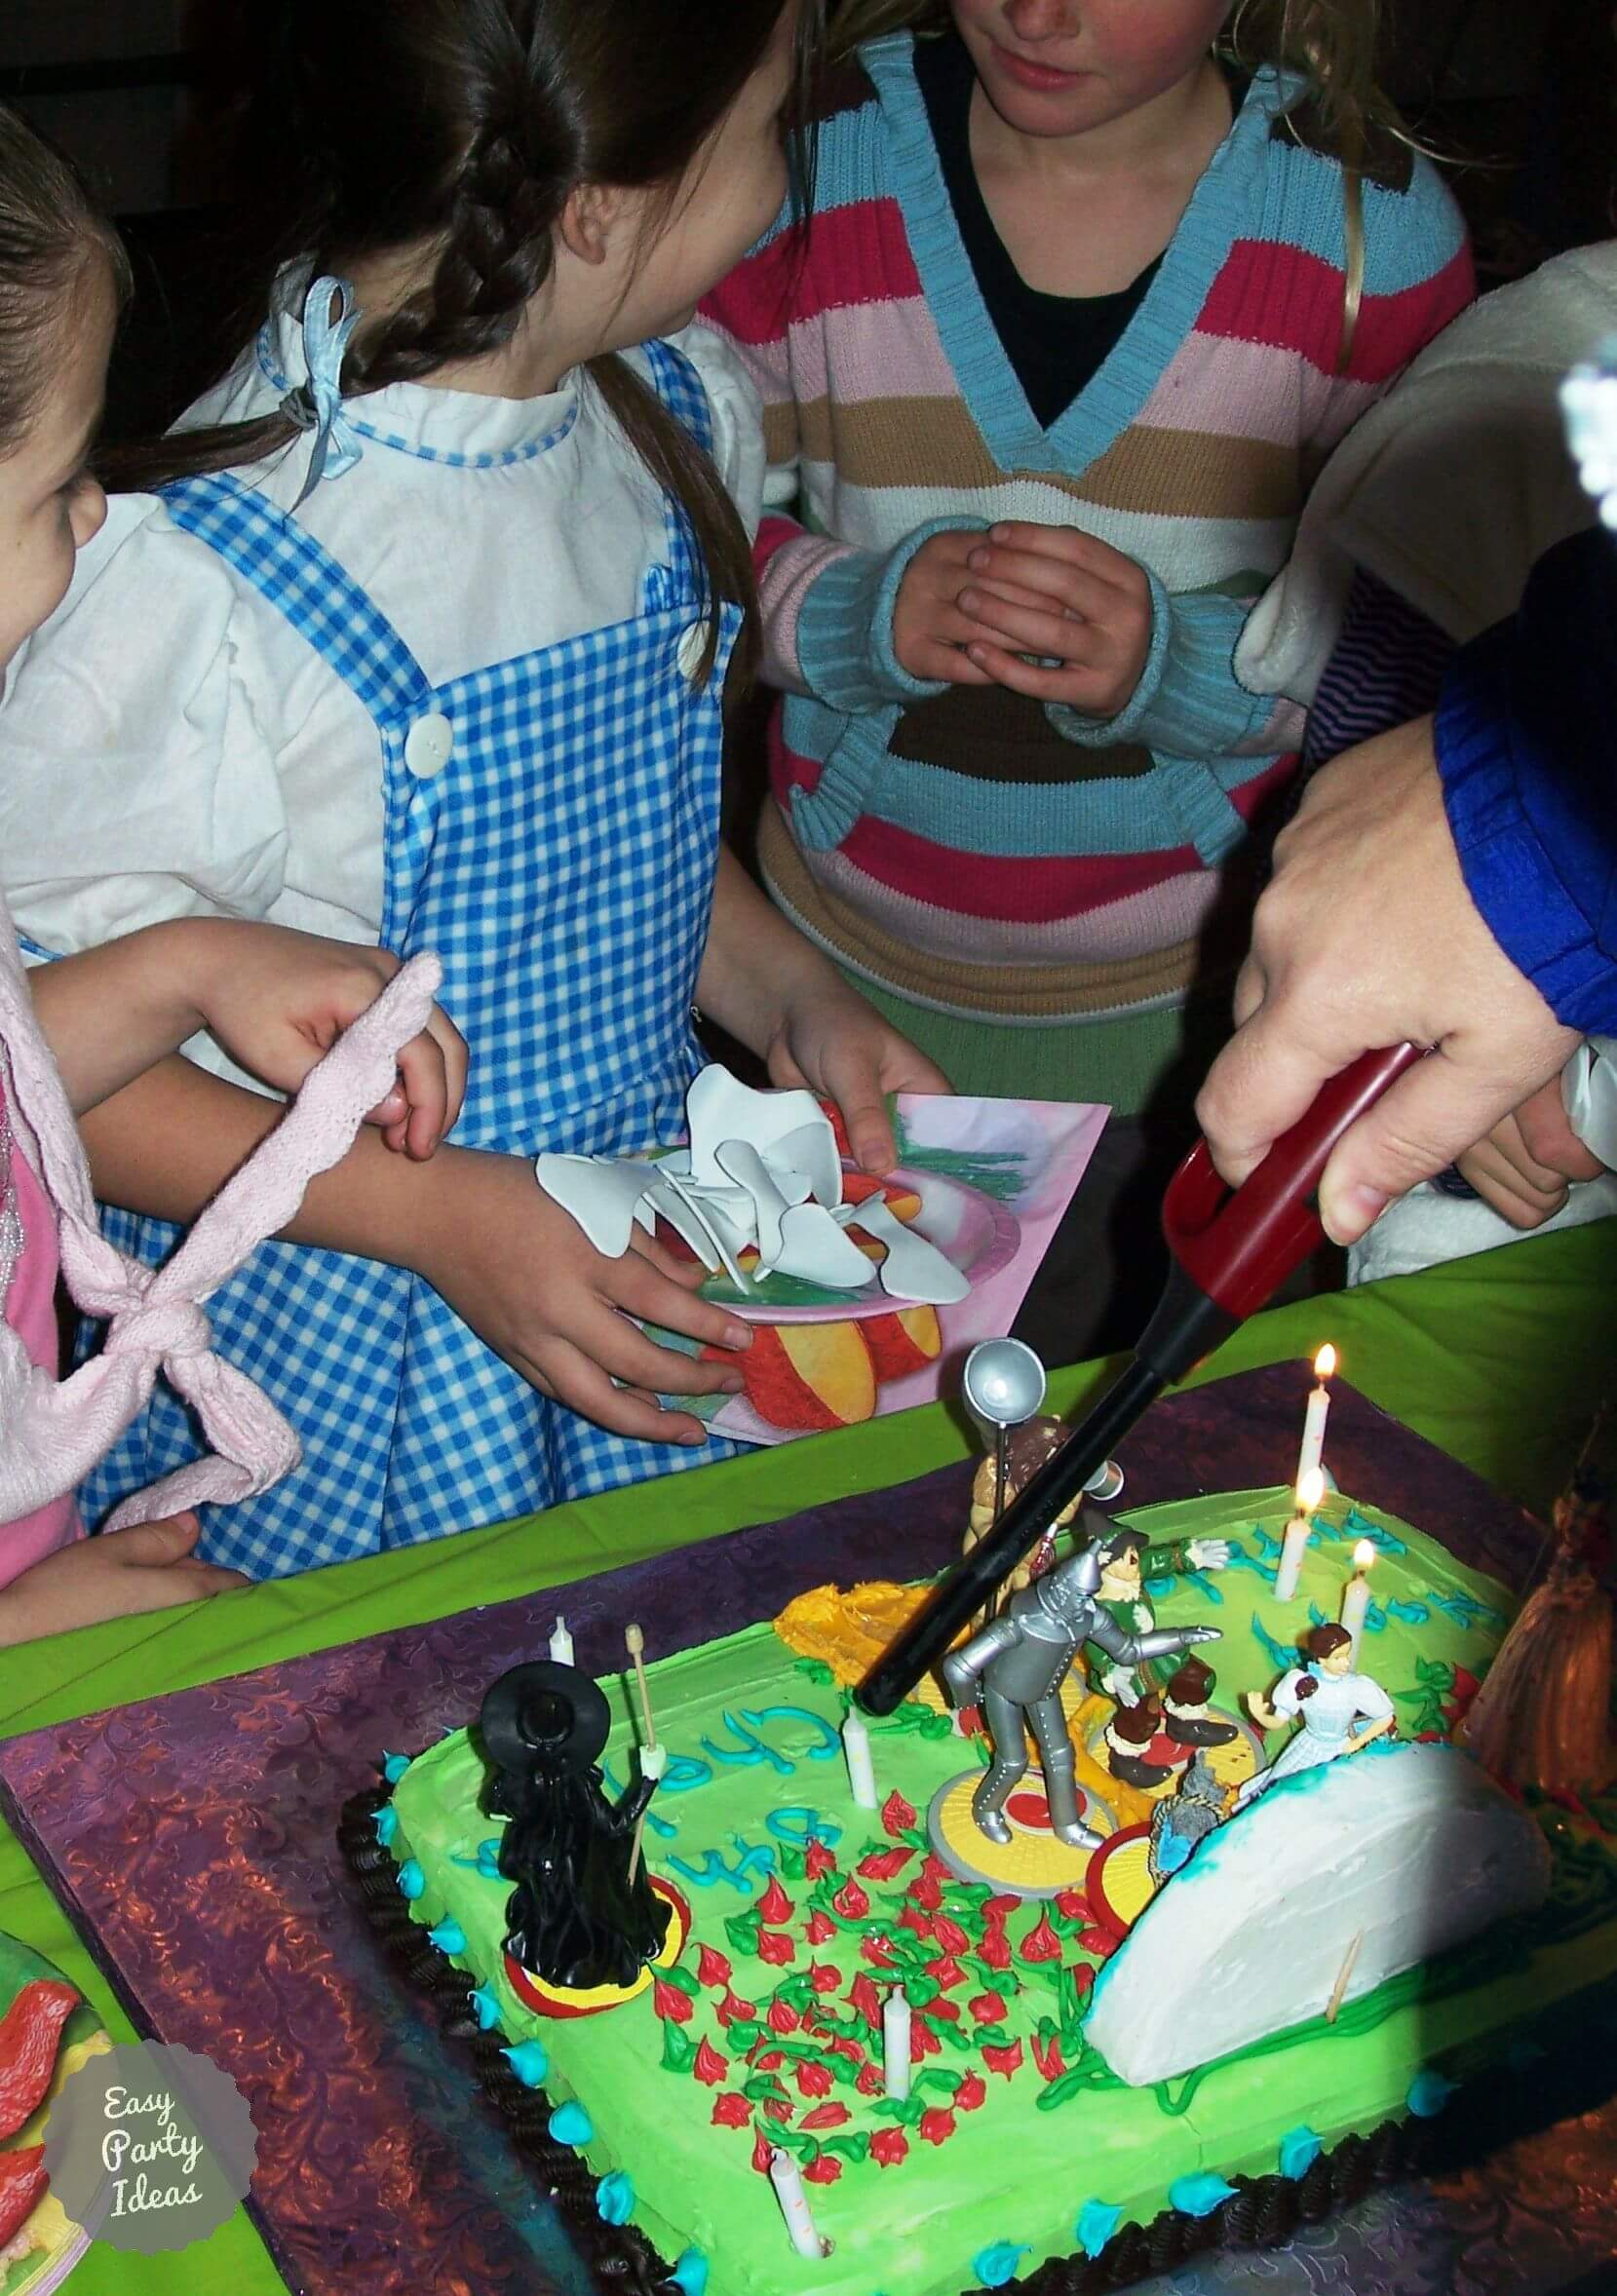 Wizard of Oz Party Cake